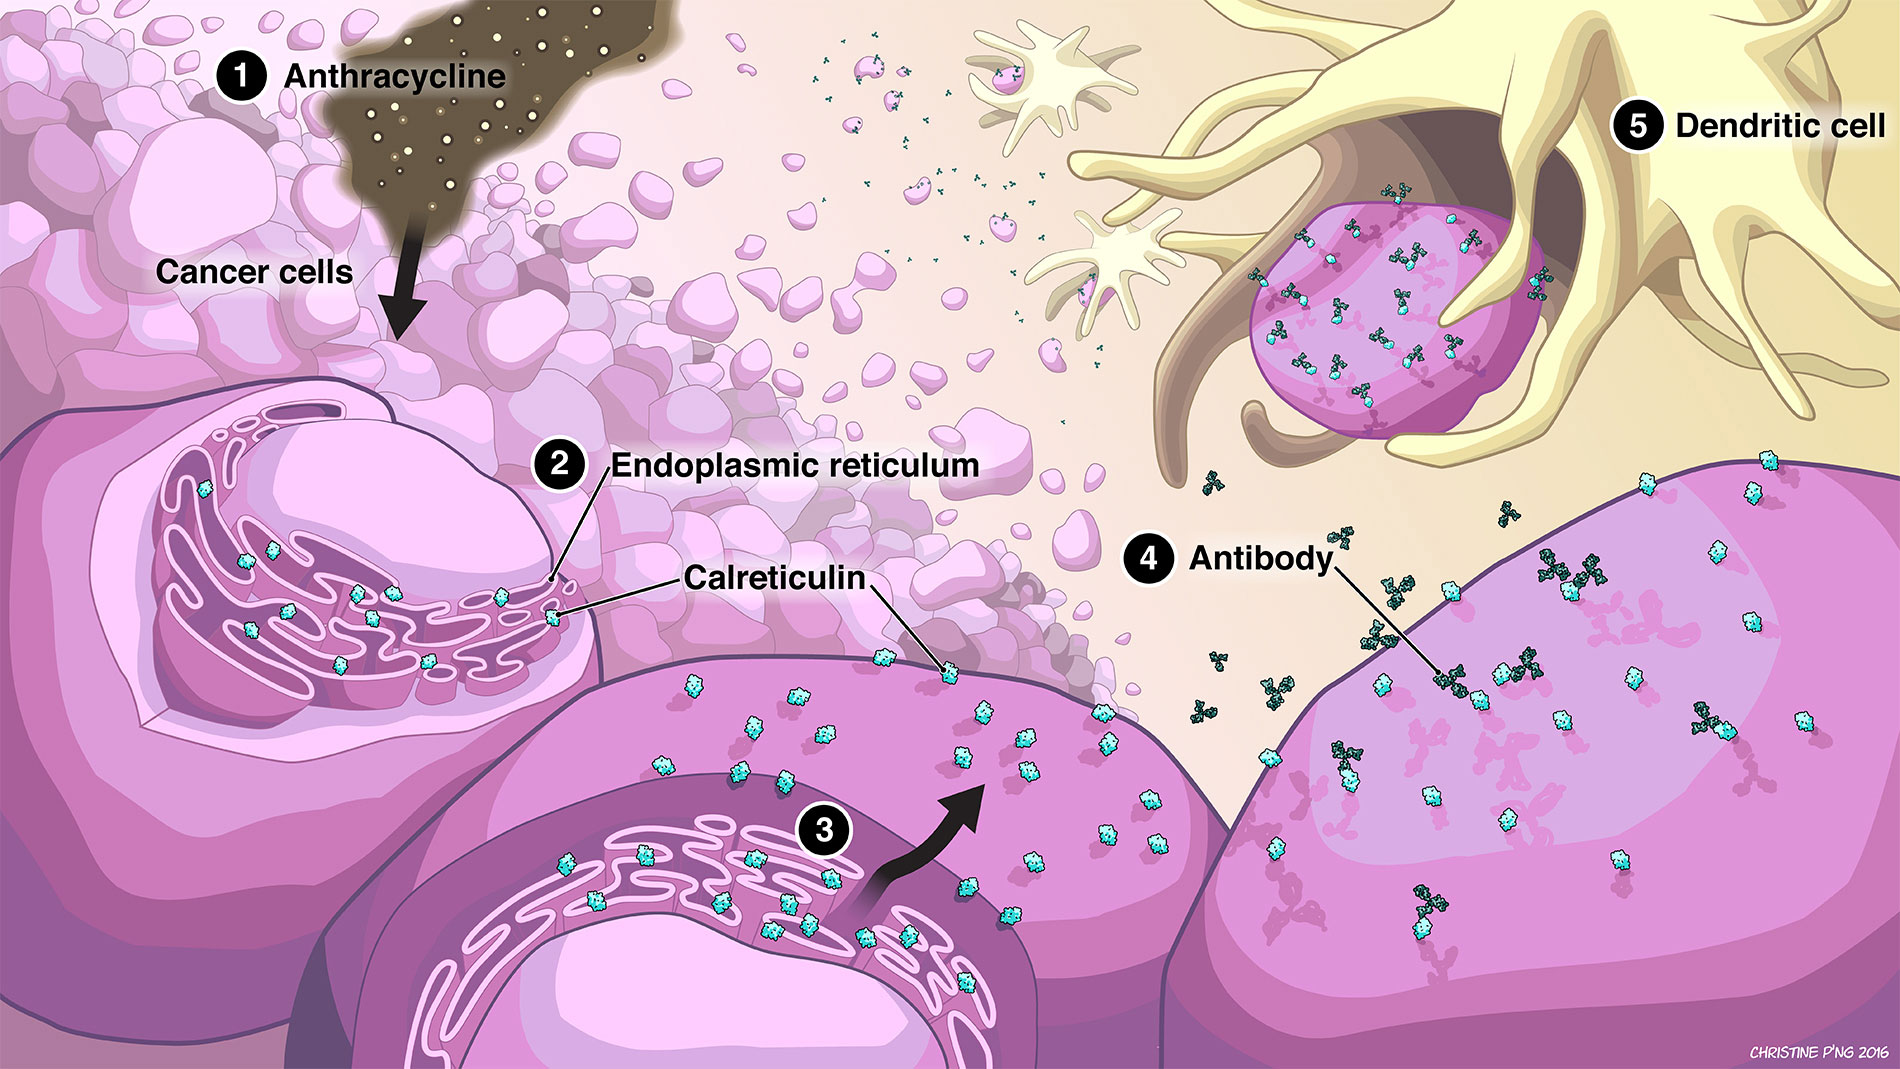 Cell-shaded depiction of cancer cells being attacked by anthracycline